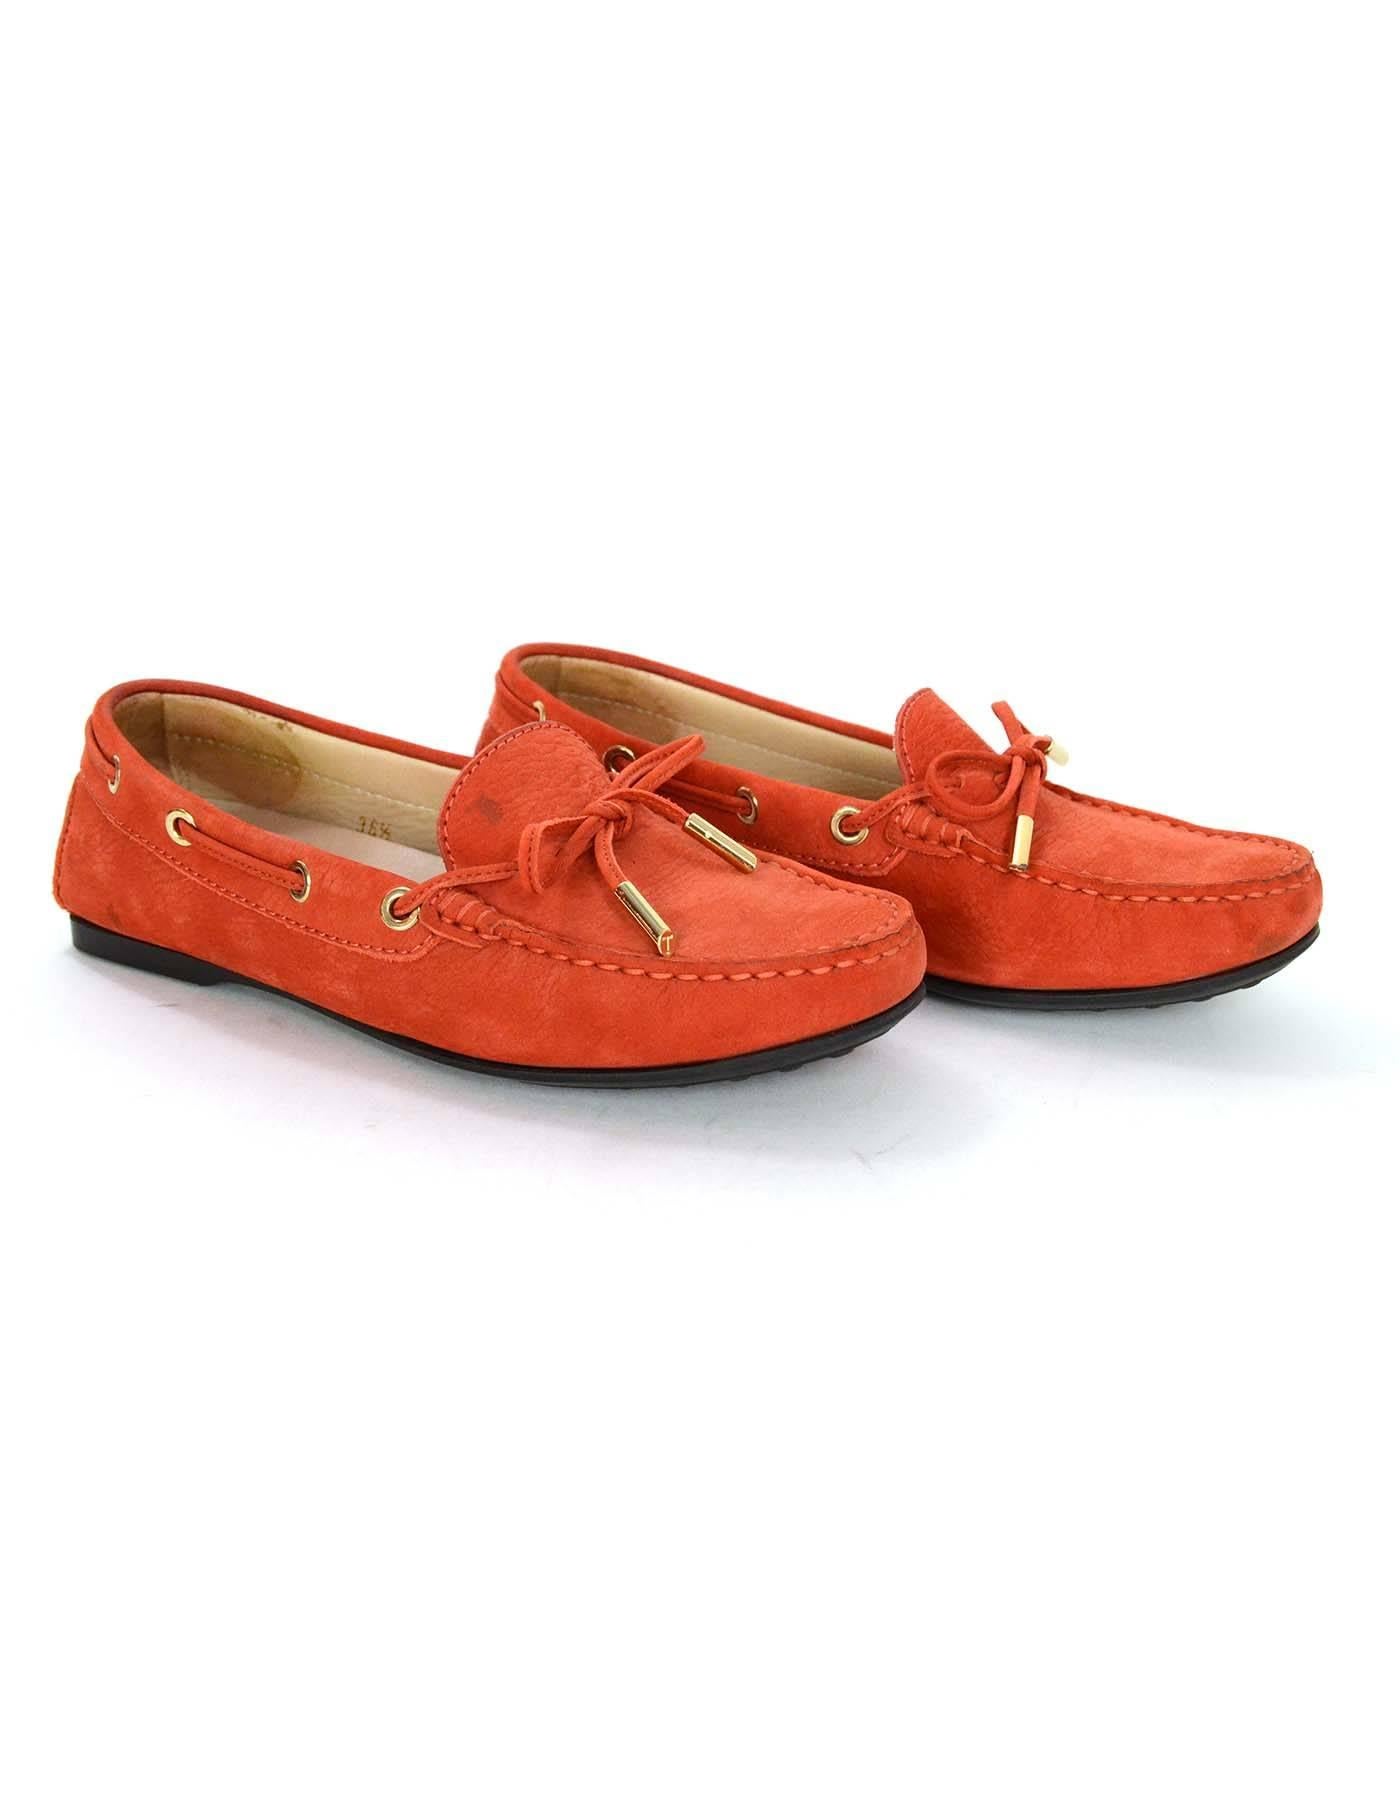 Women's Tod's Orange Suede Riding Loafers Sz 36.5